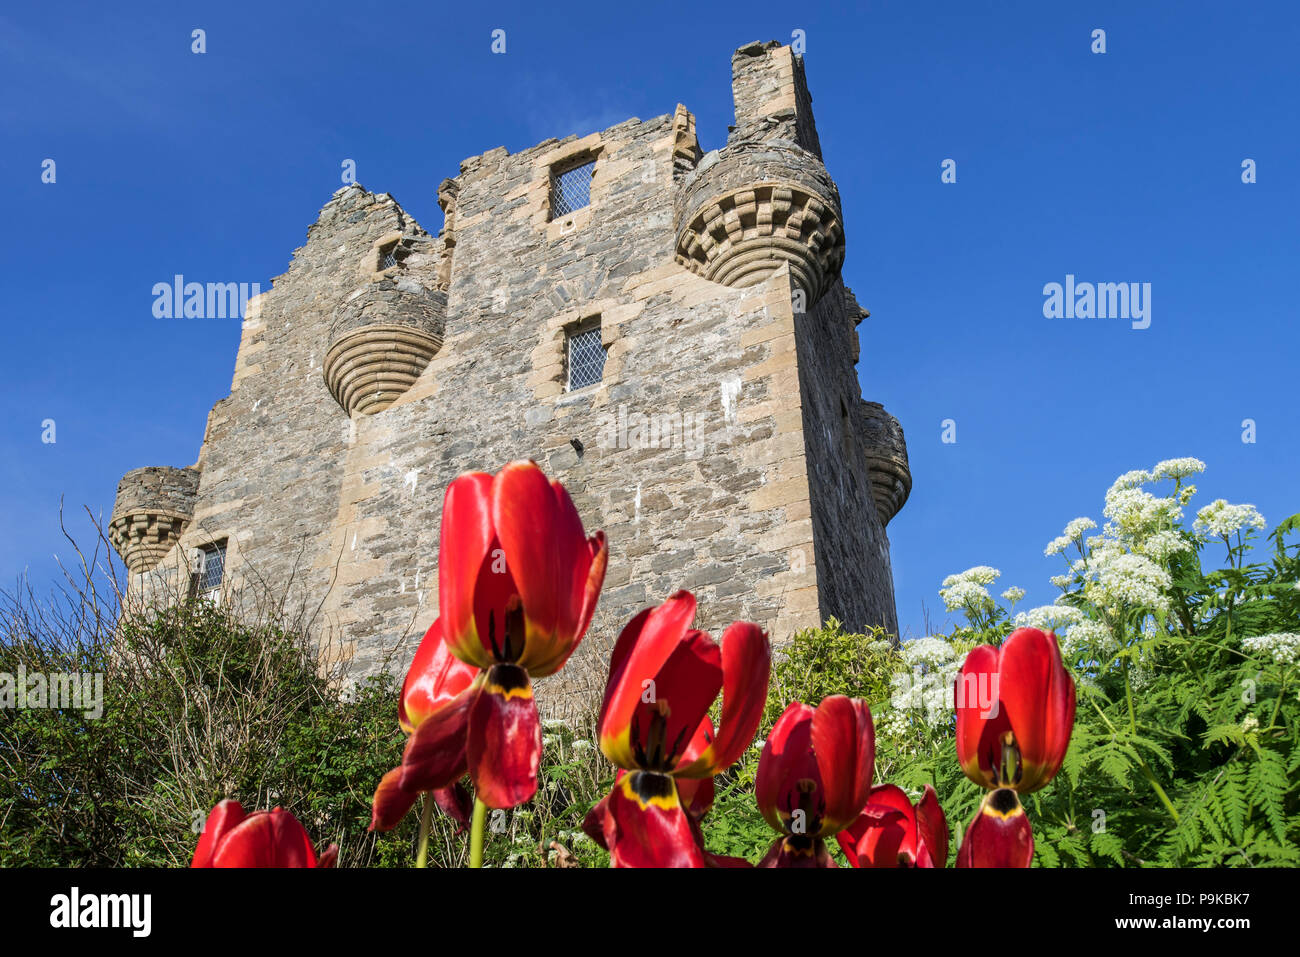 17th century Scalloway Castle, tower house in Scalloway on the Mainland, Shetland Islands, Scotland, UK Stock Photo